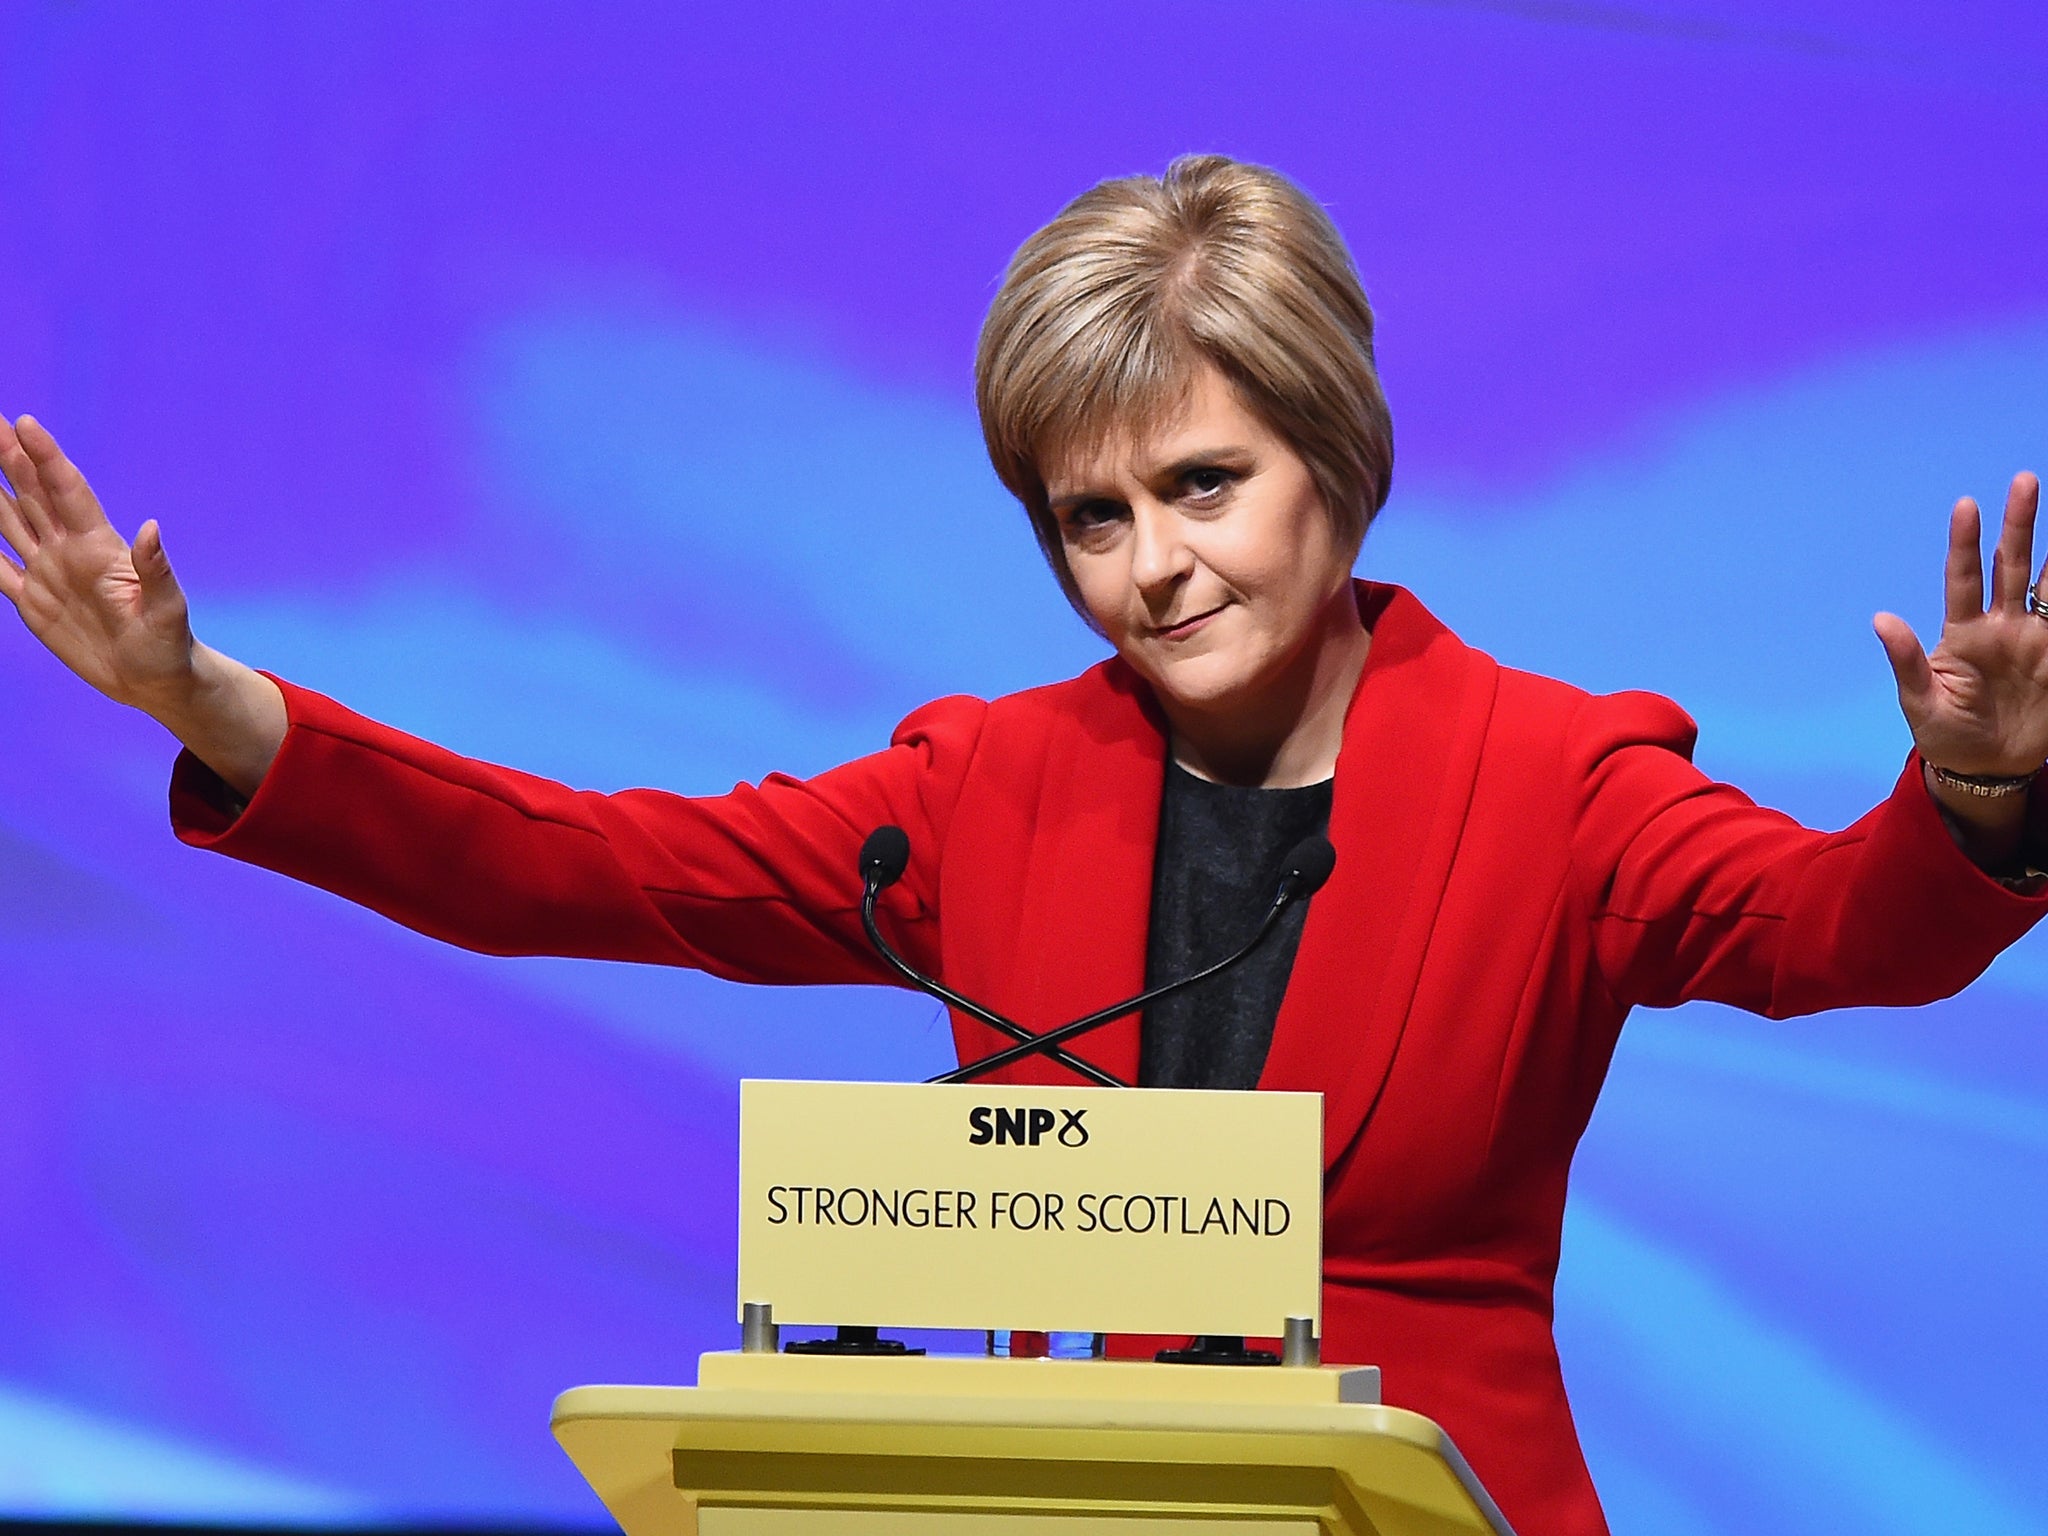 The SNP surge tilted the election by putting English and Welsh voters off Labour